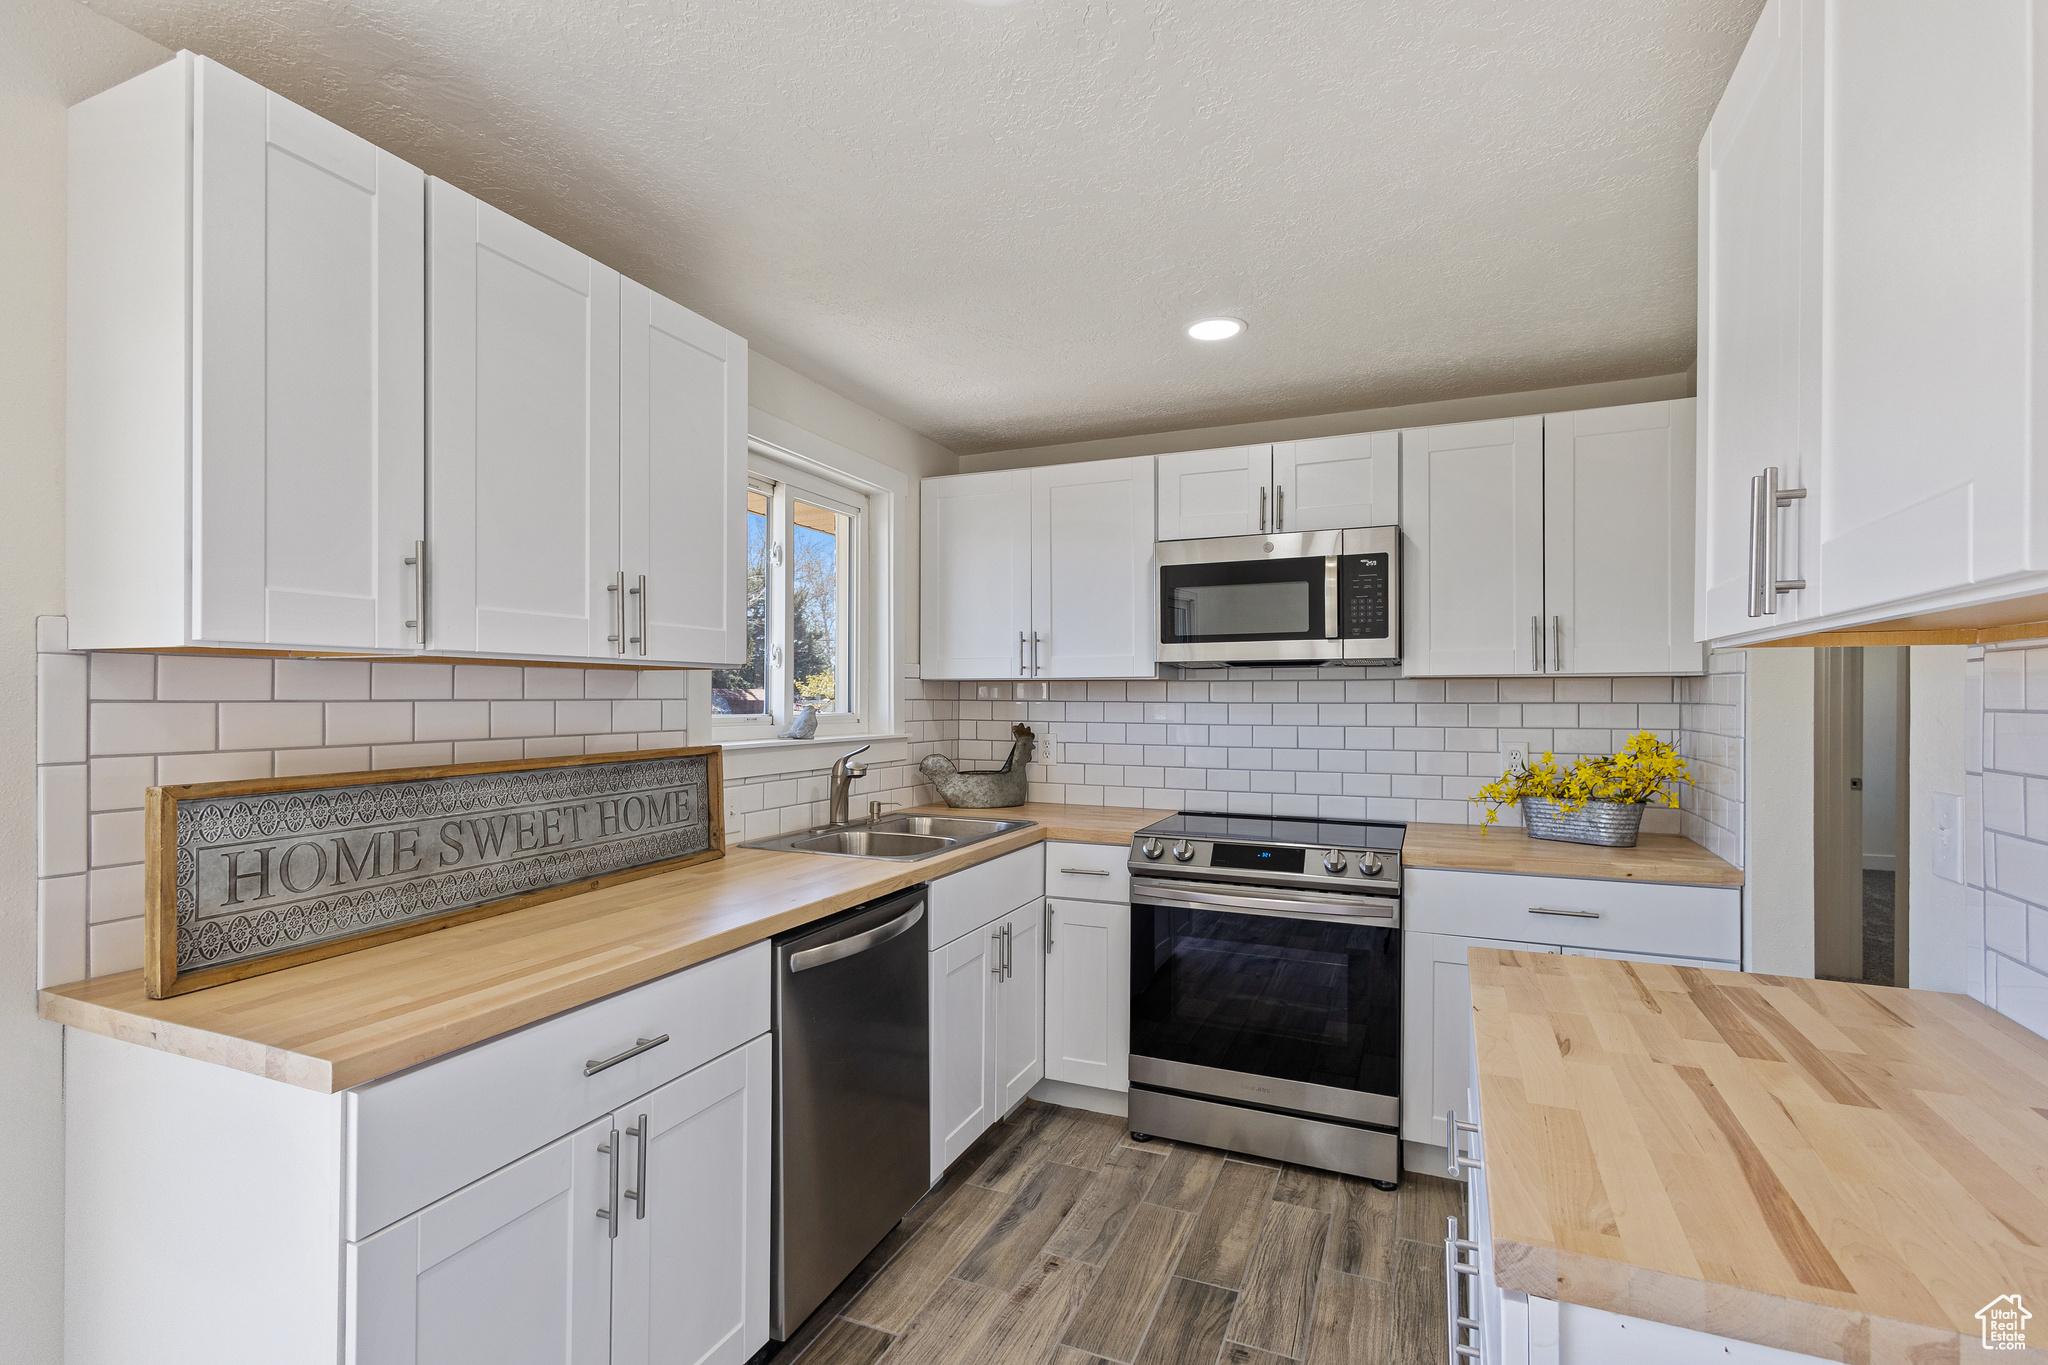 Updated Kitchen featuring tiled backsplash, Stainless appliances , Butcher Block countertops, and tile floors.